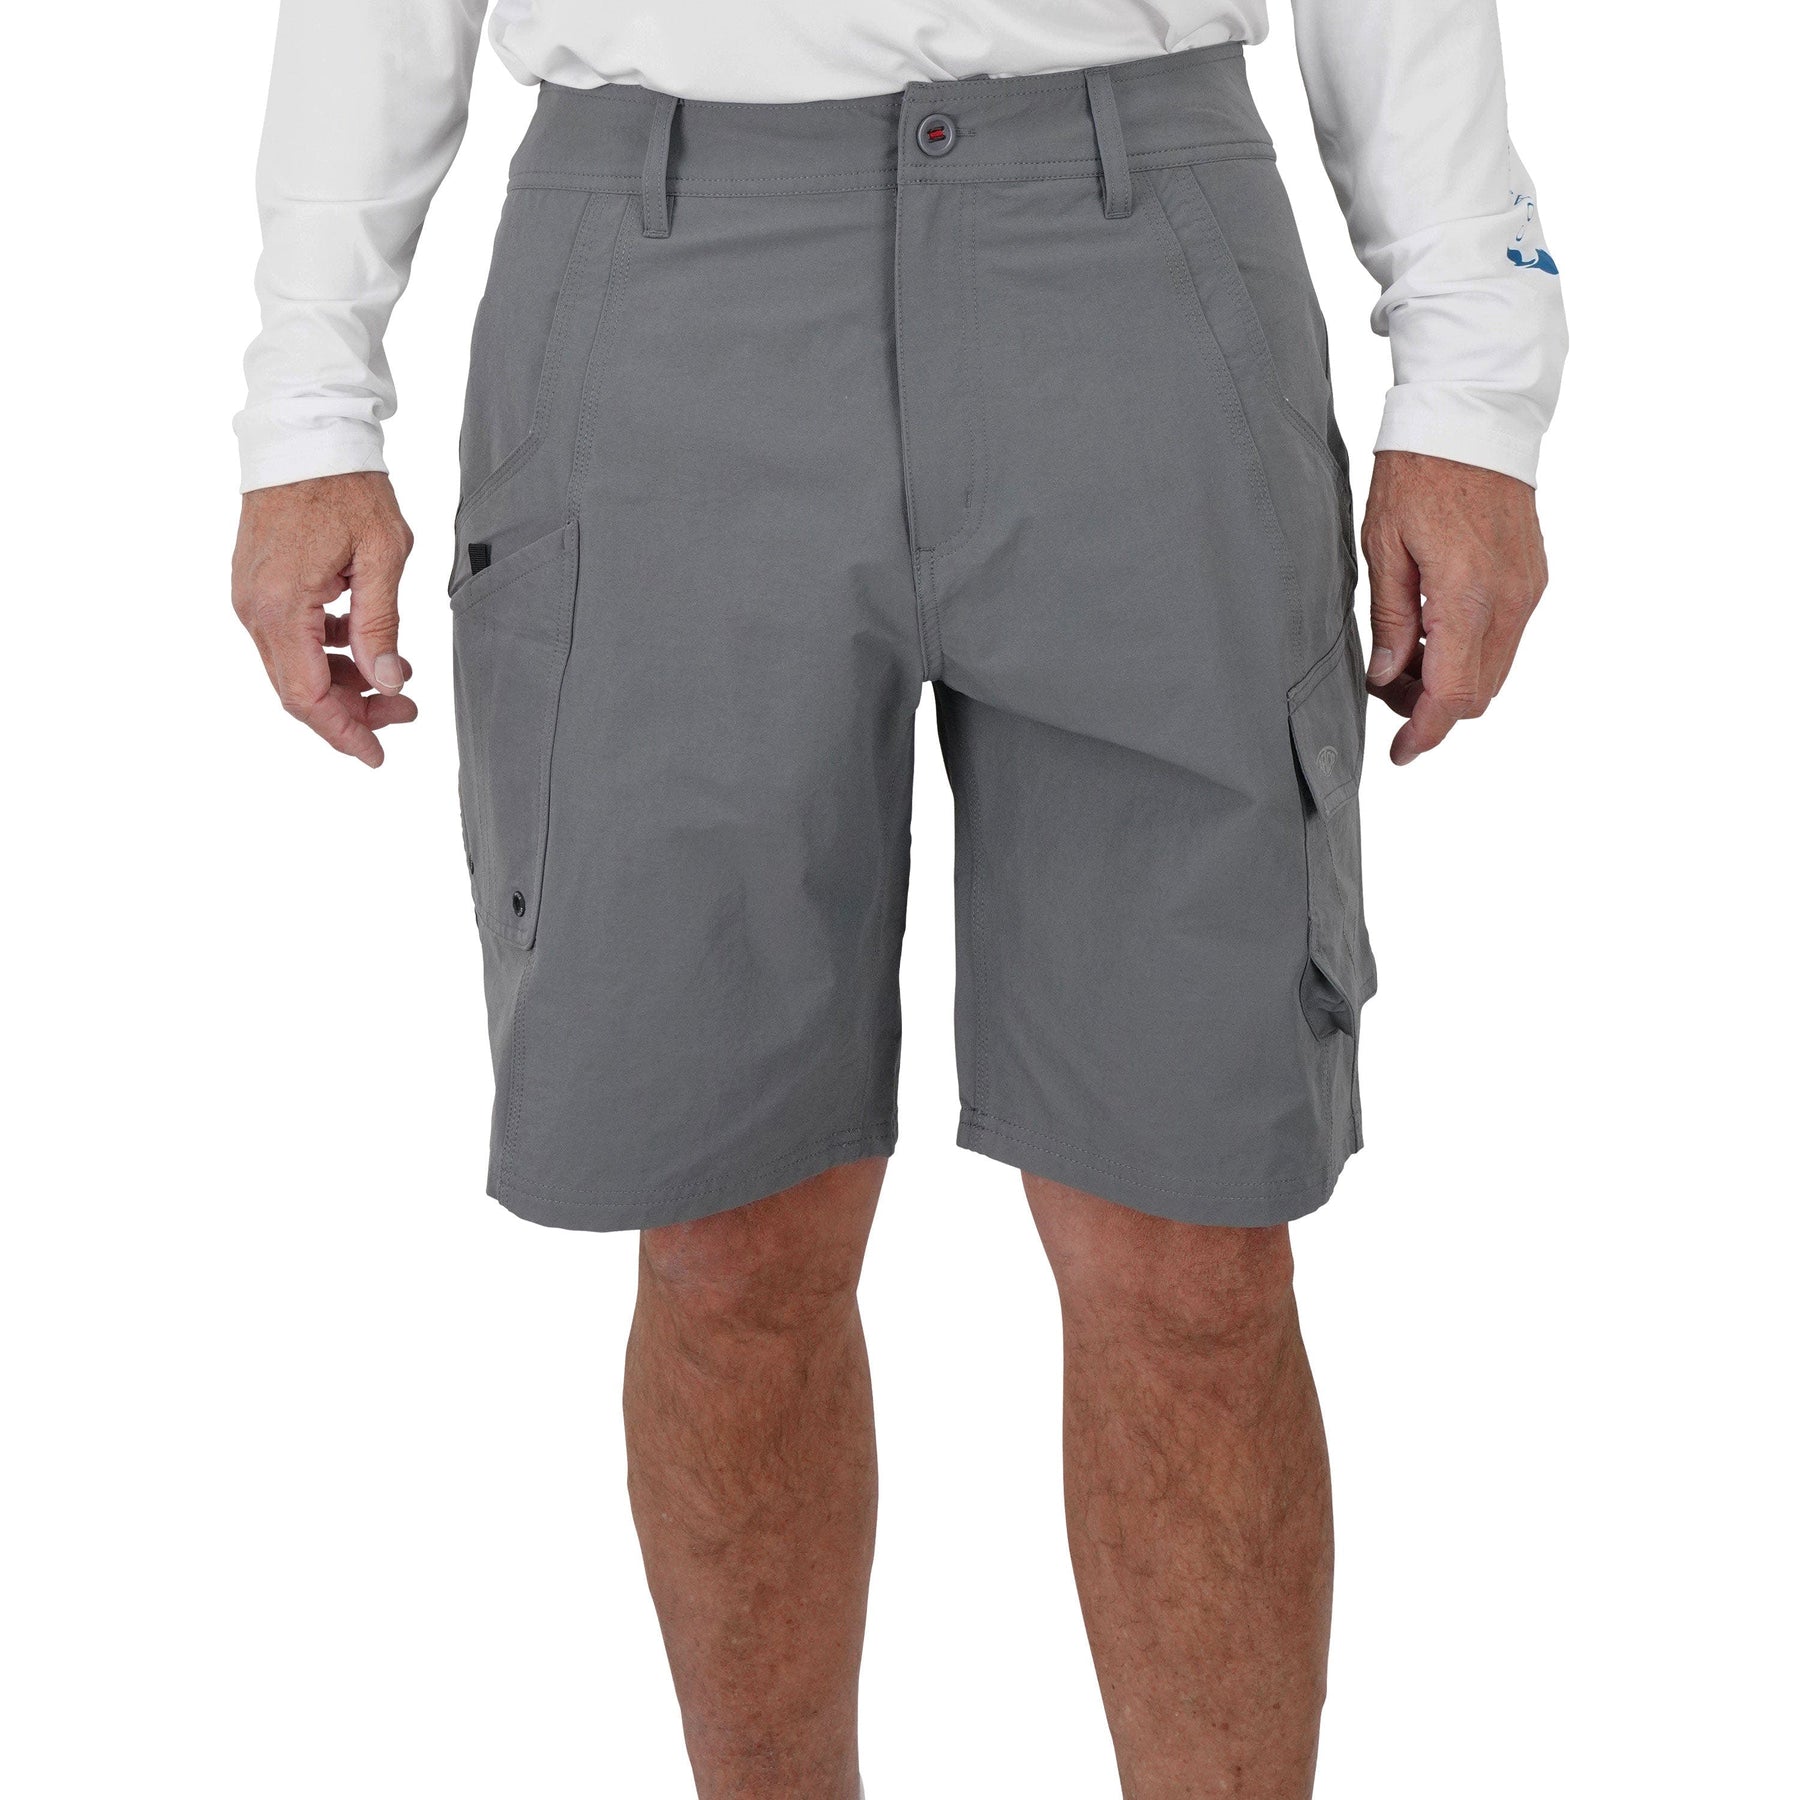 AFTCO Stealth Fishing Shorts - Charcoal - 34